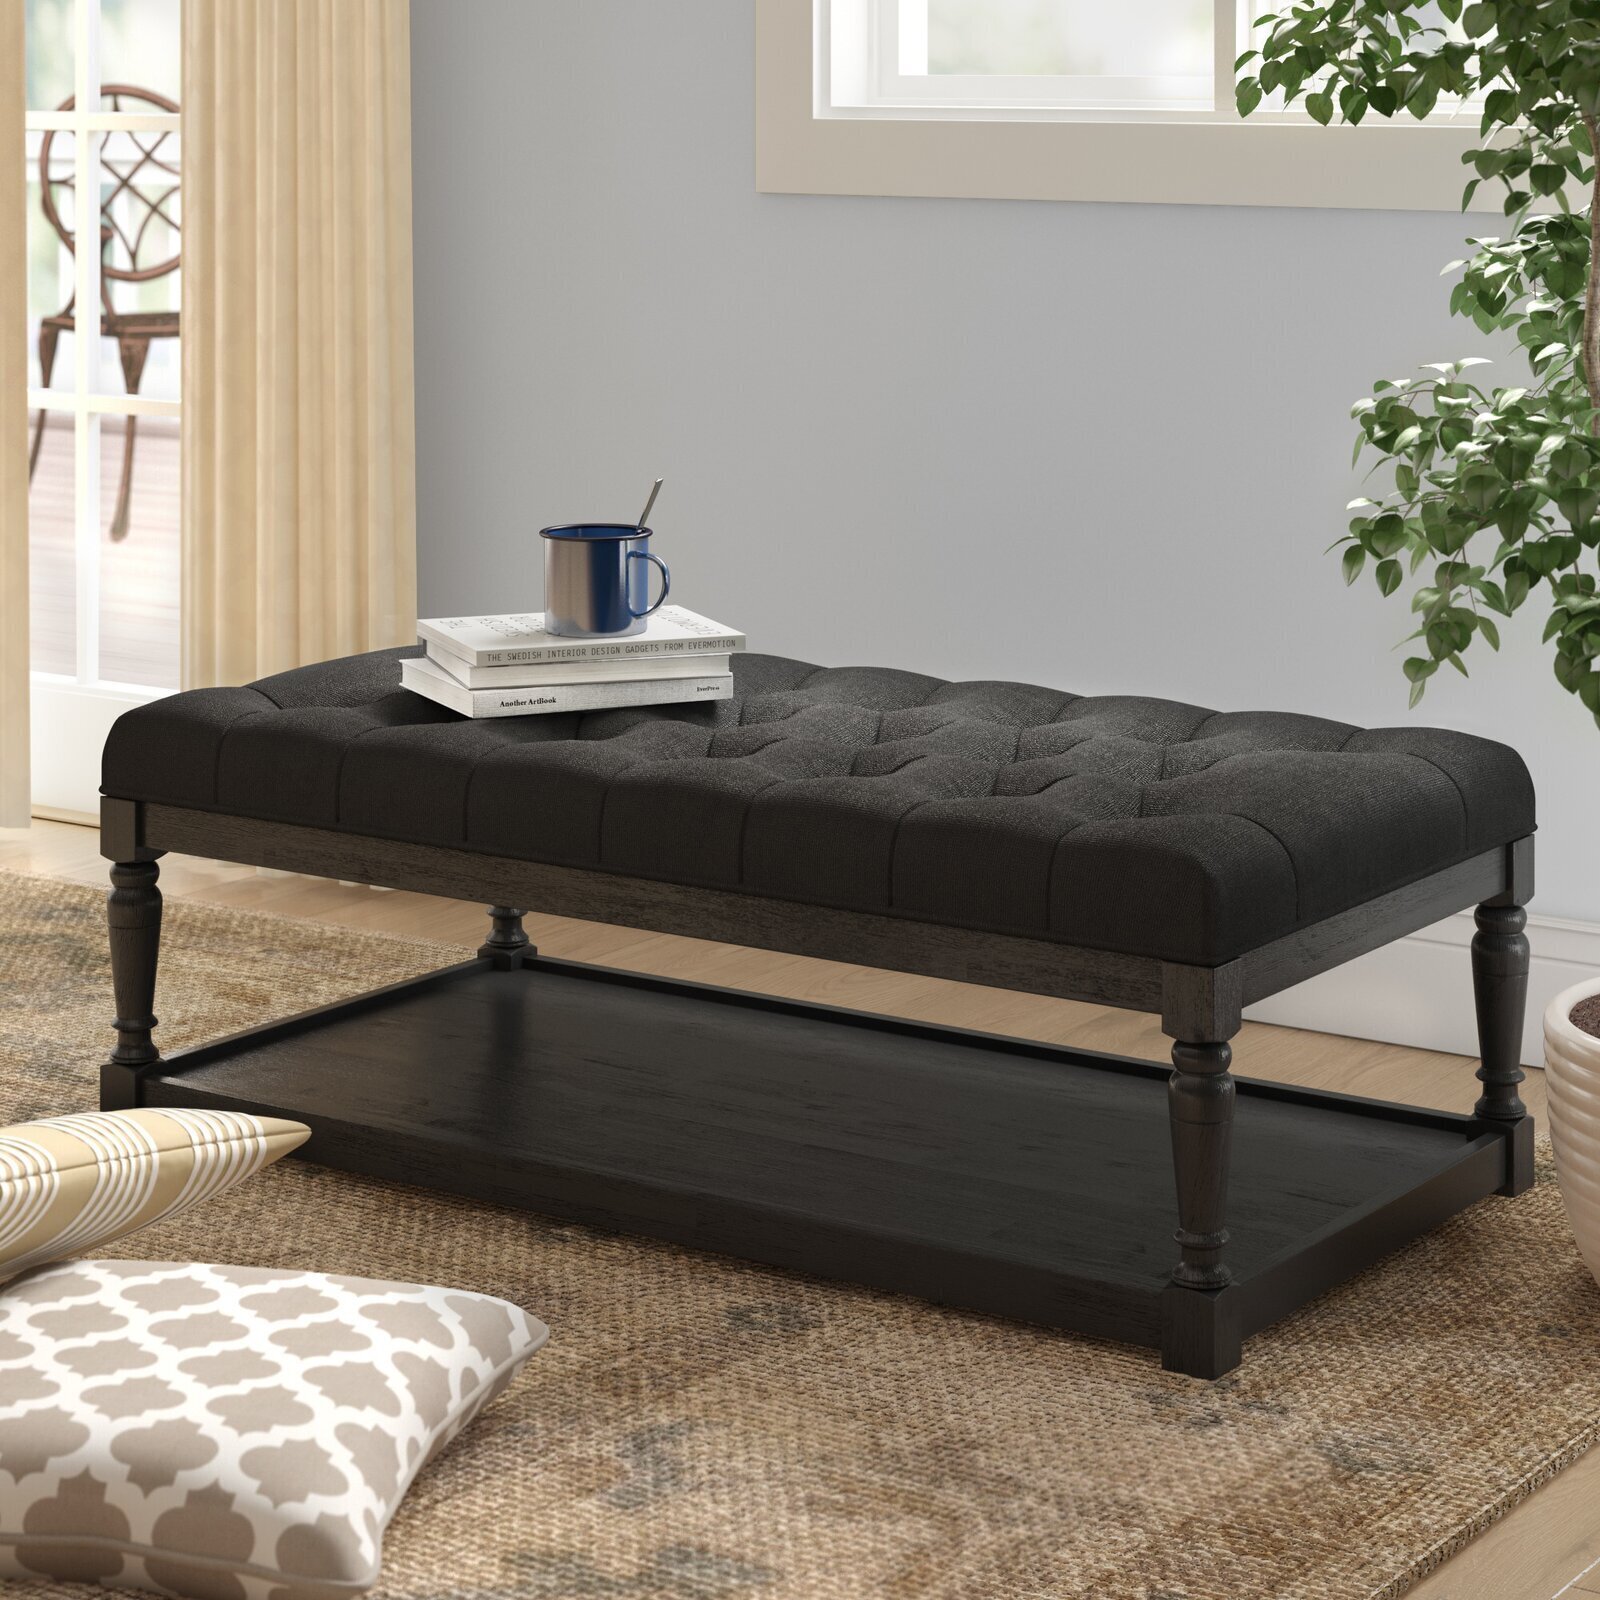 Large king size bench with a shelf